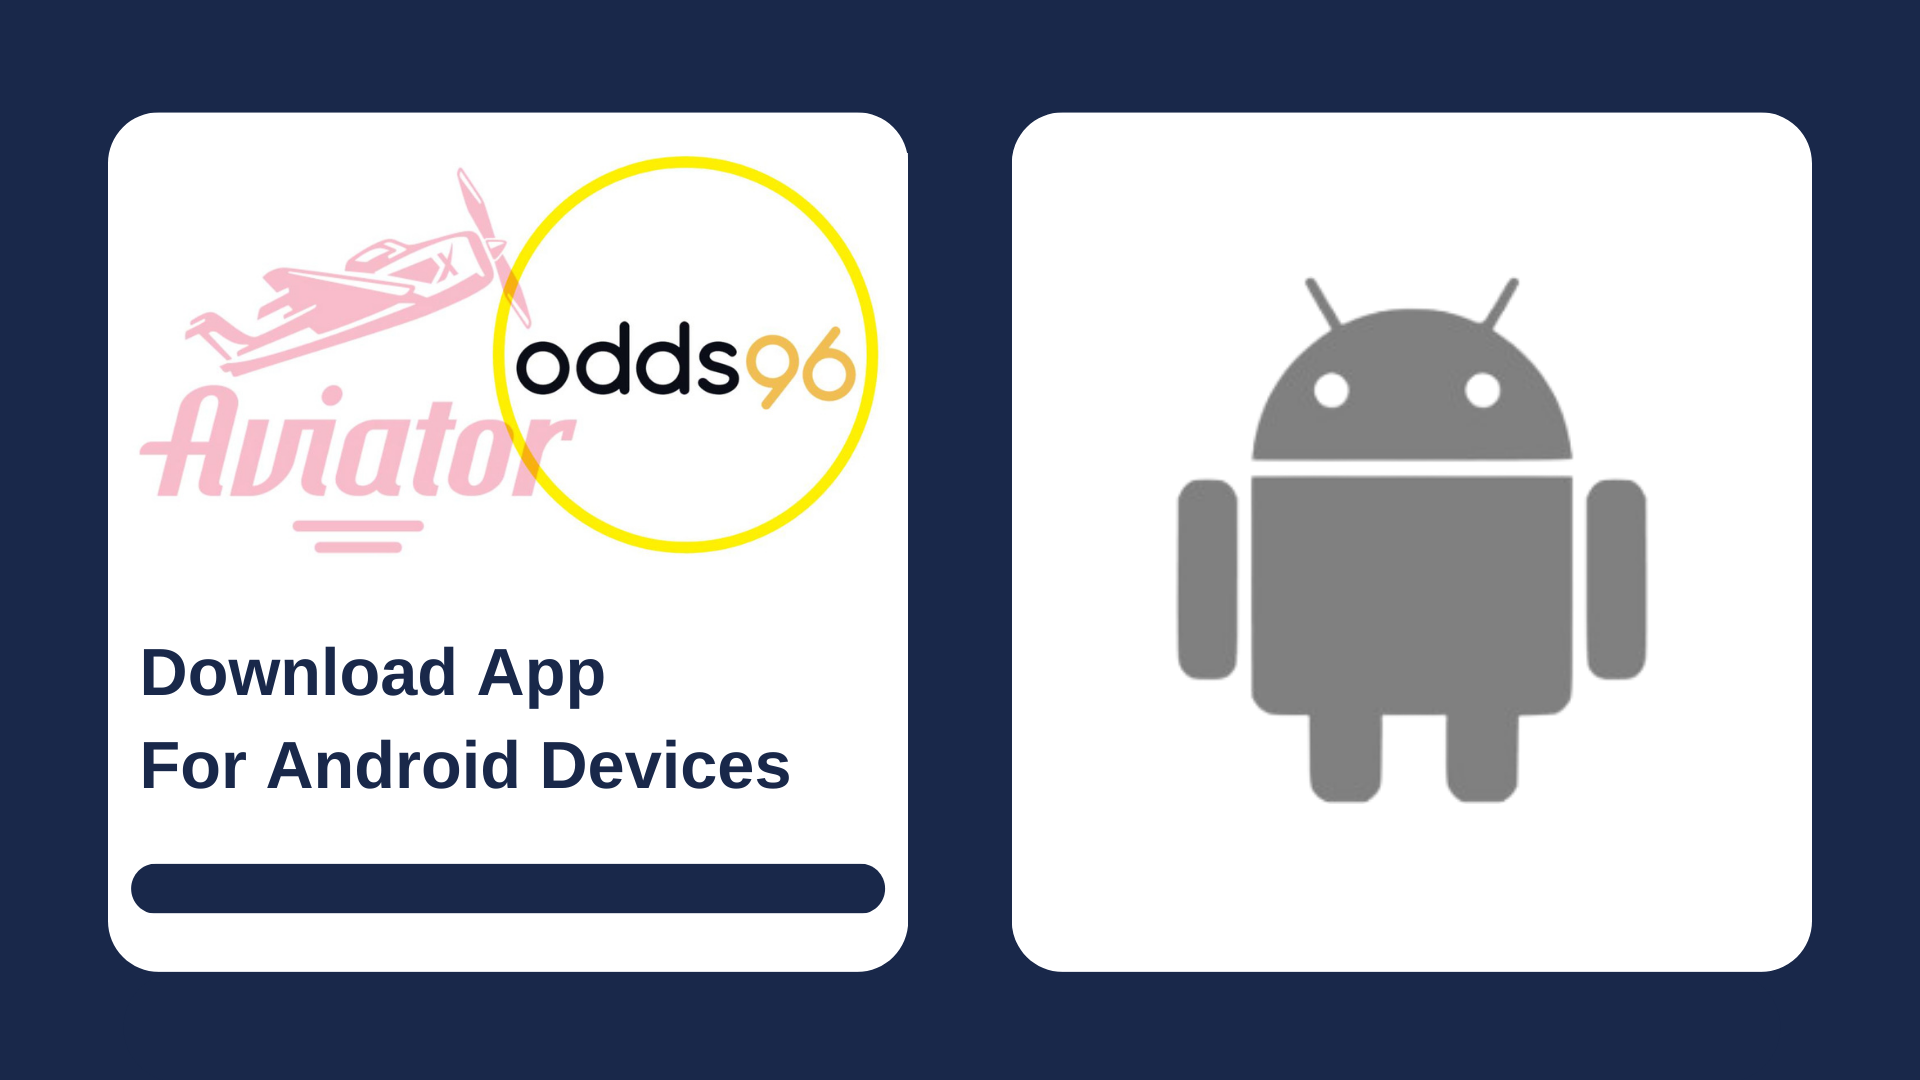 First picture showing Aviator and Odds96 logos with text, and second - Android icon